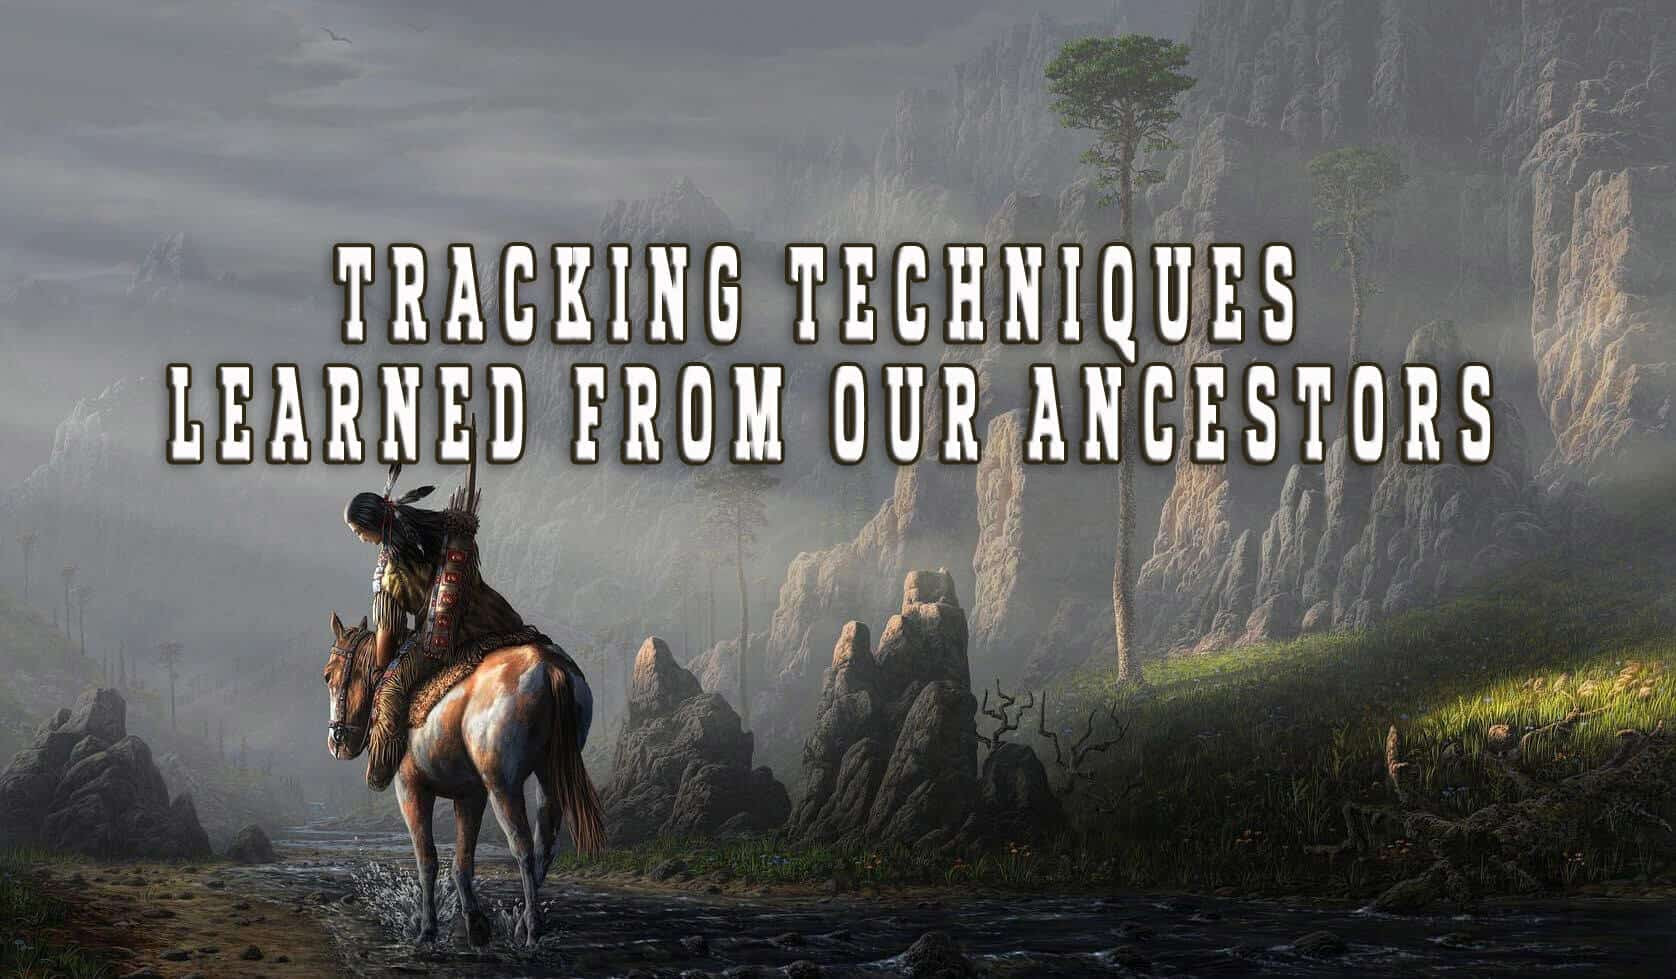 Tracking Techniques learned from our ancestors